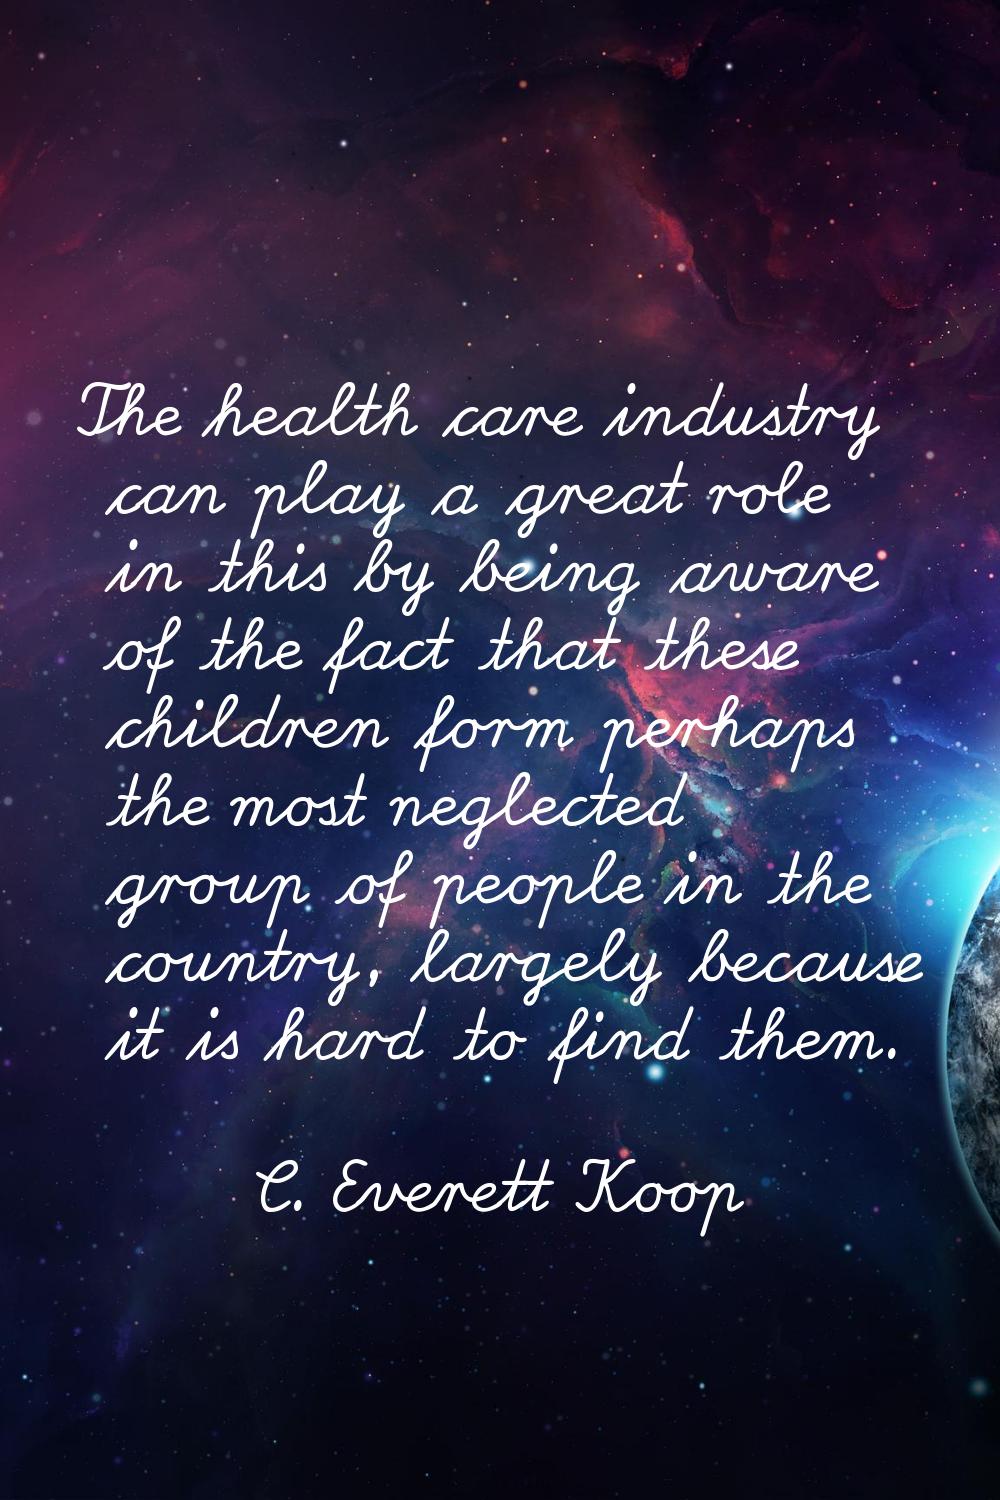 The health care industry can play a great role in this by being aware of the fact that these childr